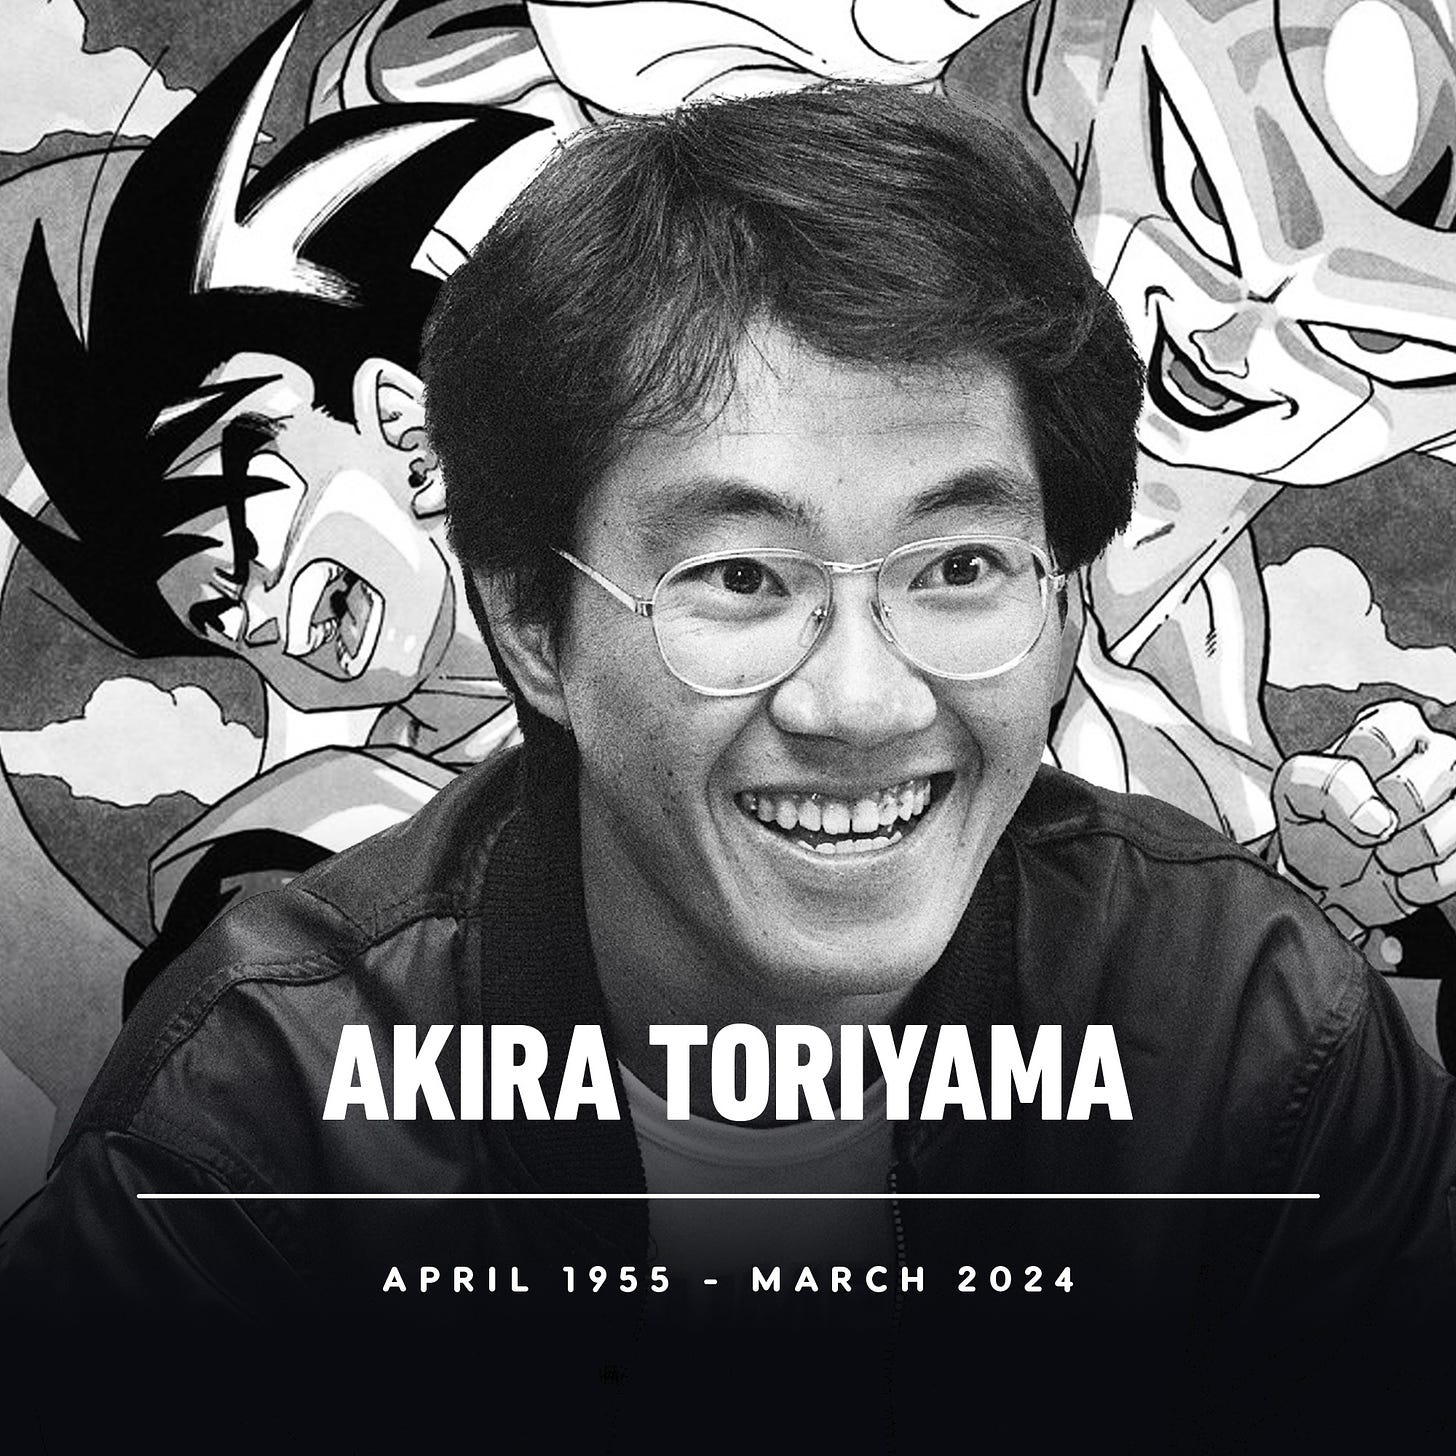 IGN tribute picture to Akira Toriyama A young Akira smiles with Goku and Frieza behind him. The words "Akira Toriyama April 1955 - March 2024" are on the picture